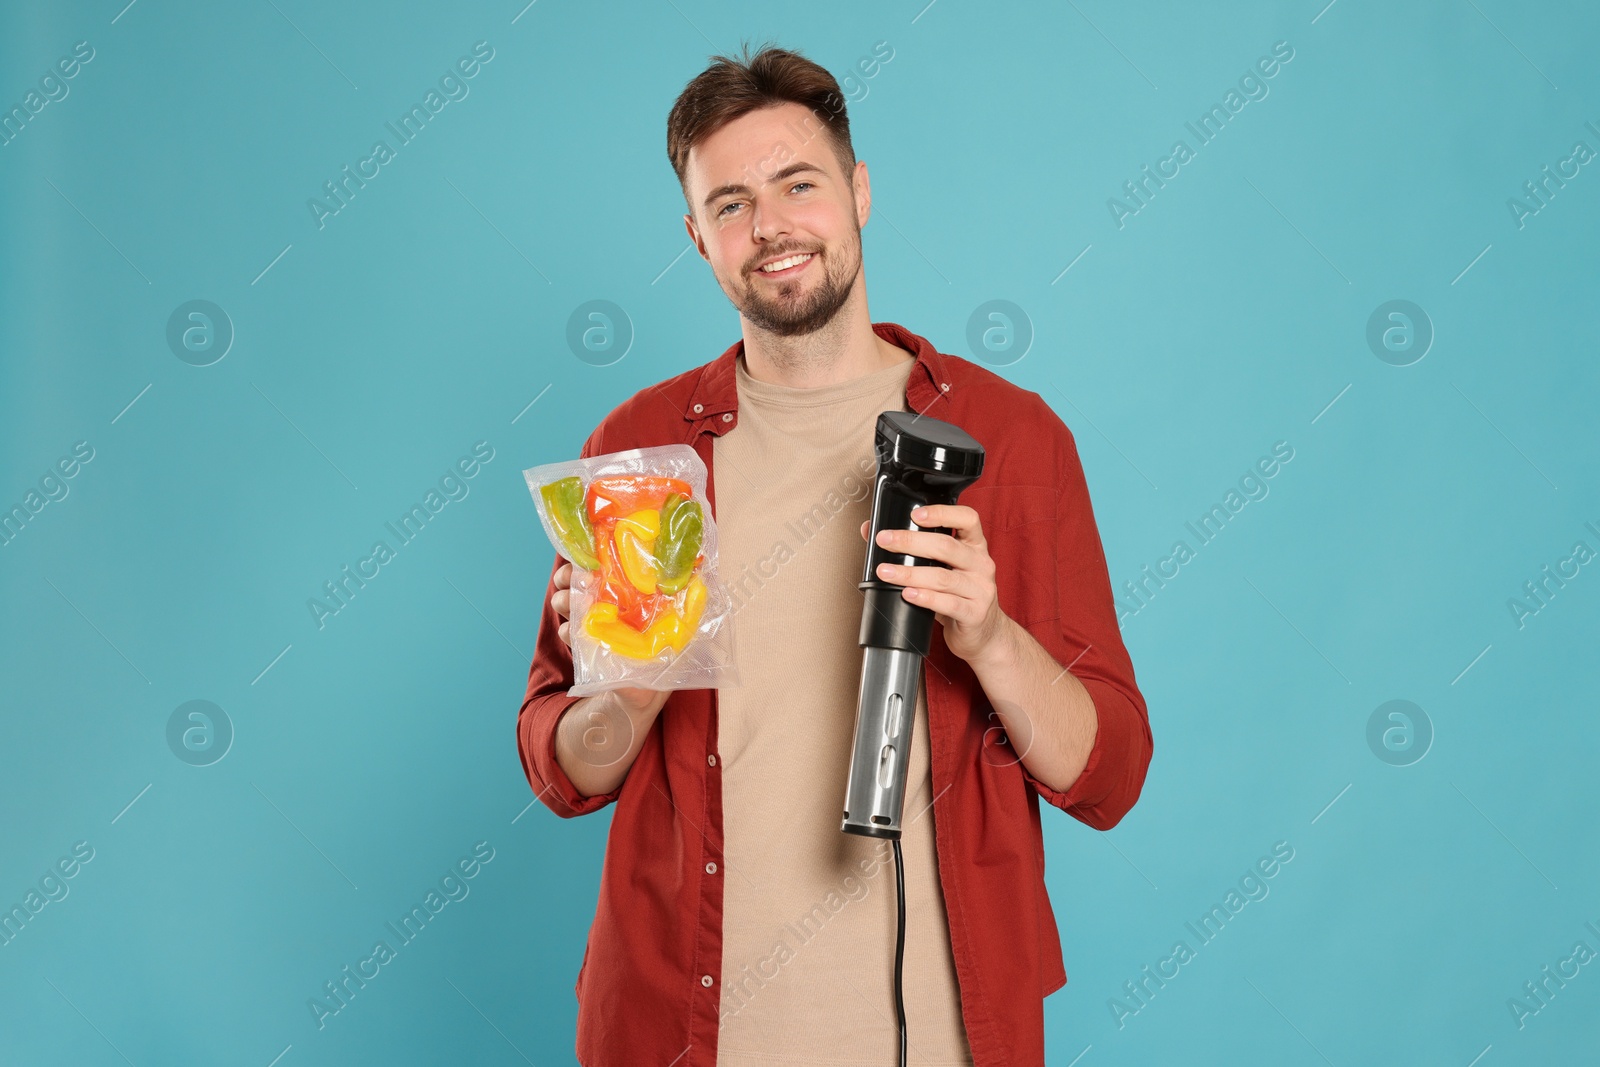 Photo of Smiling man holding sous vide cooker and vegetables in vacuum pack on light blue background